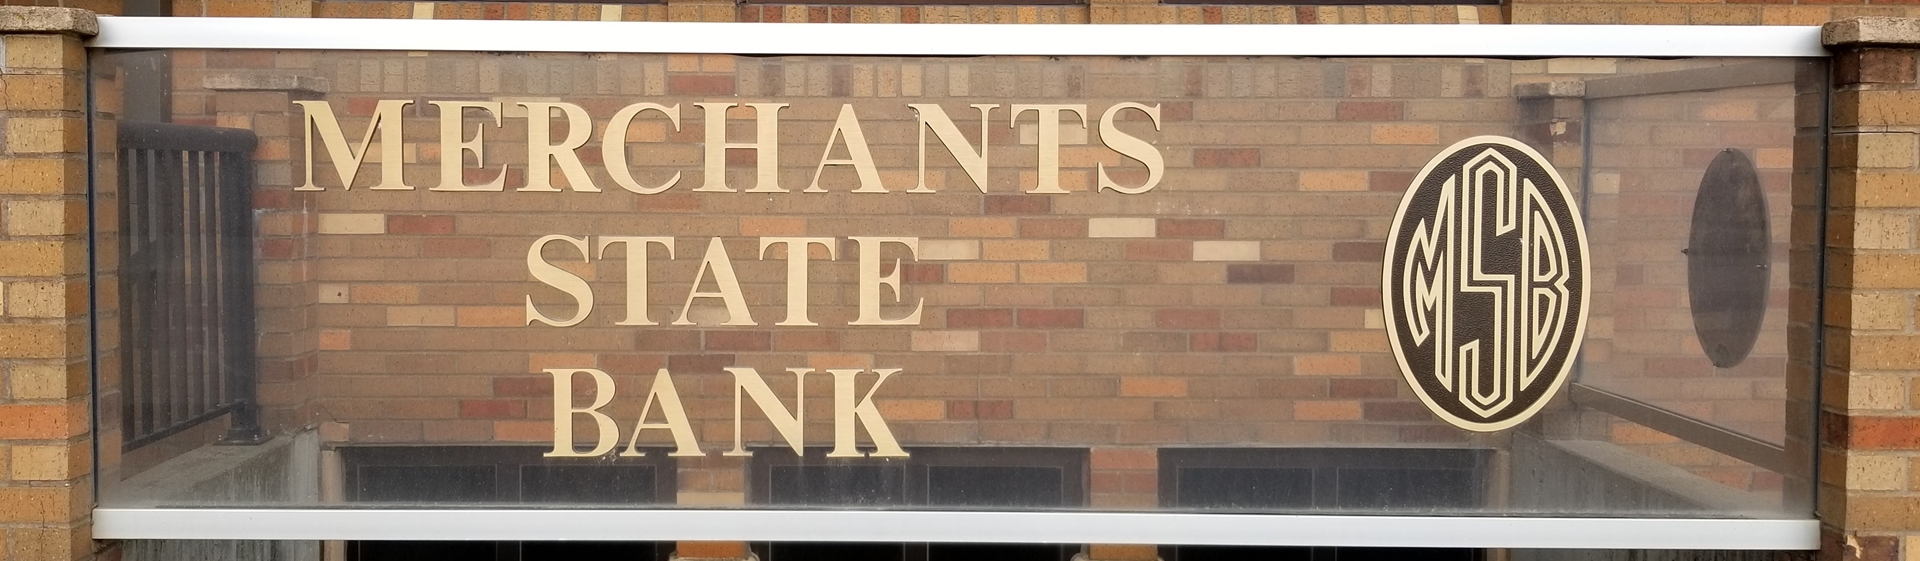 Merchants state bank front sign